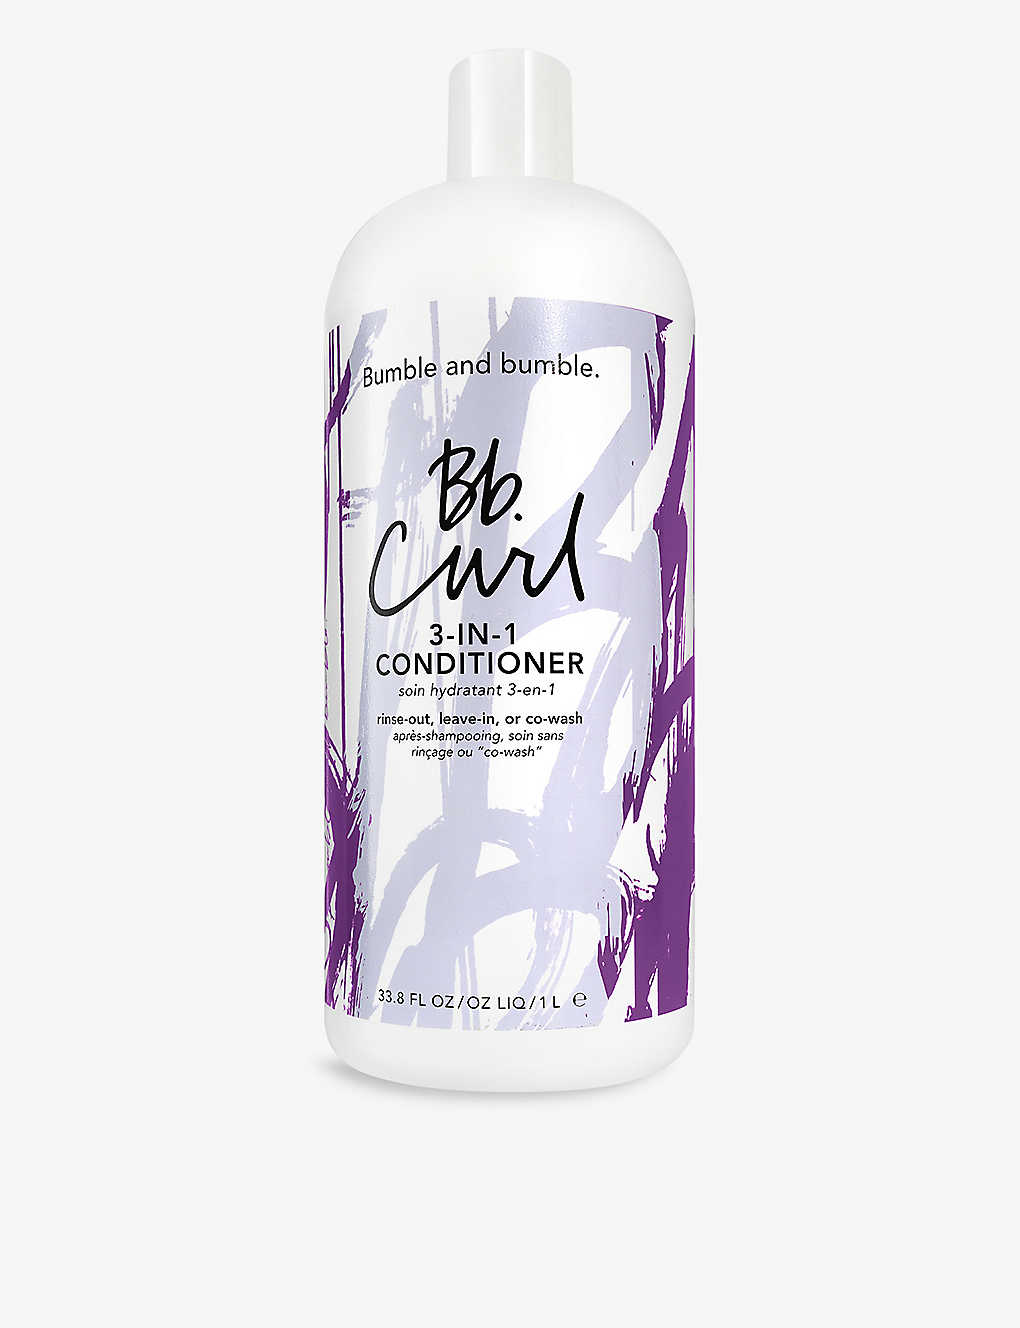 Bumble And Bumble Curl 3-in-1 Conditioner